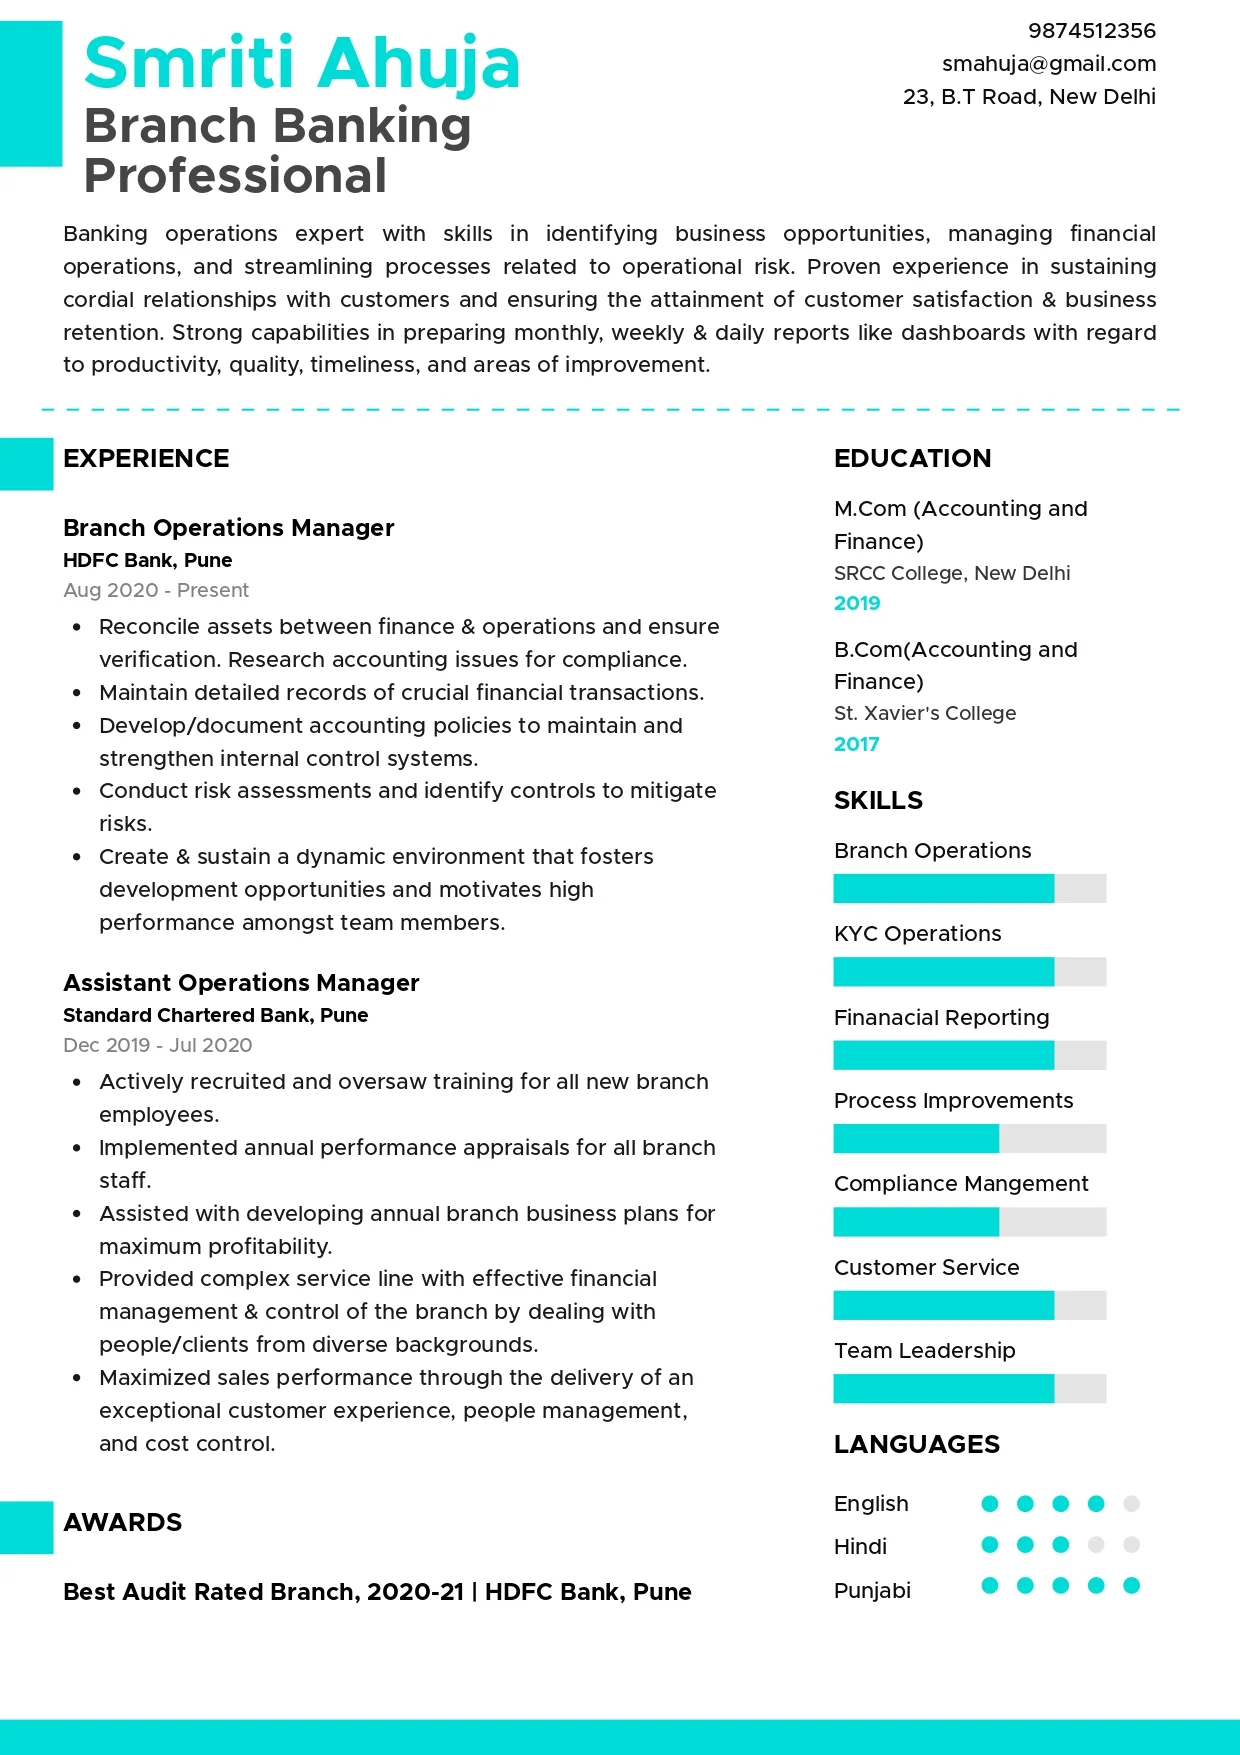 Sample Resume of Branch Banking Professional | Free Resume Templates & Samples on Resumod.co